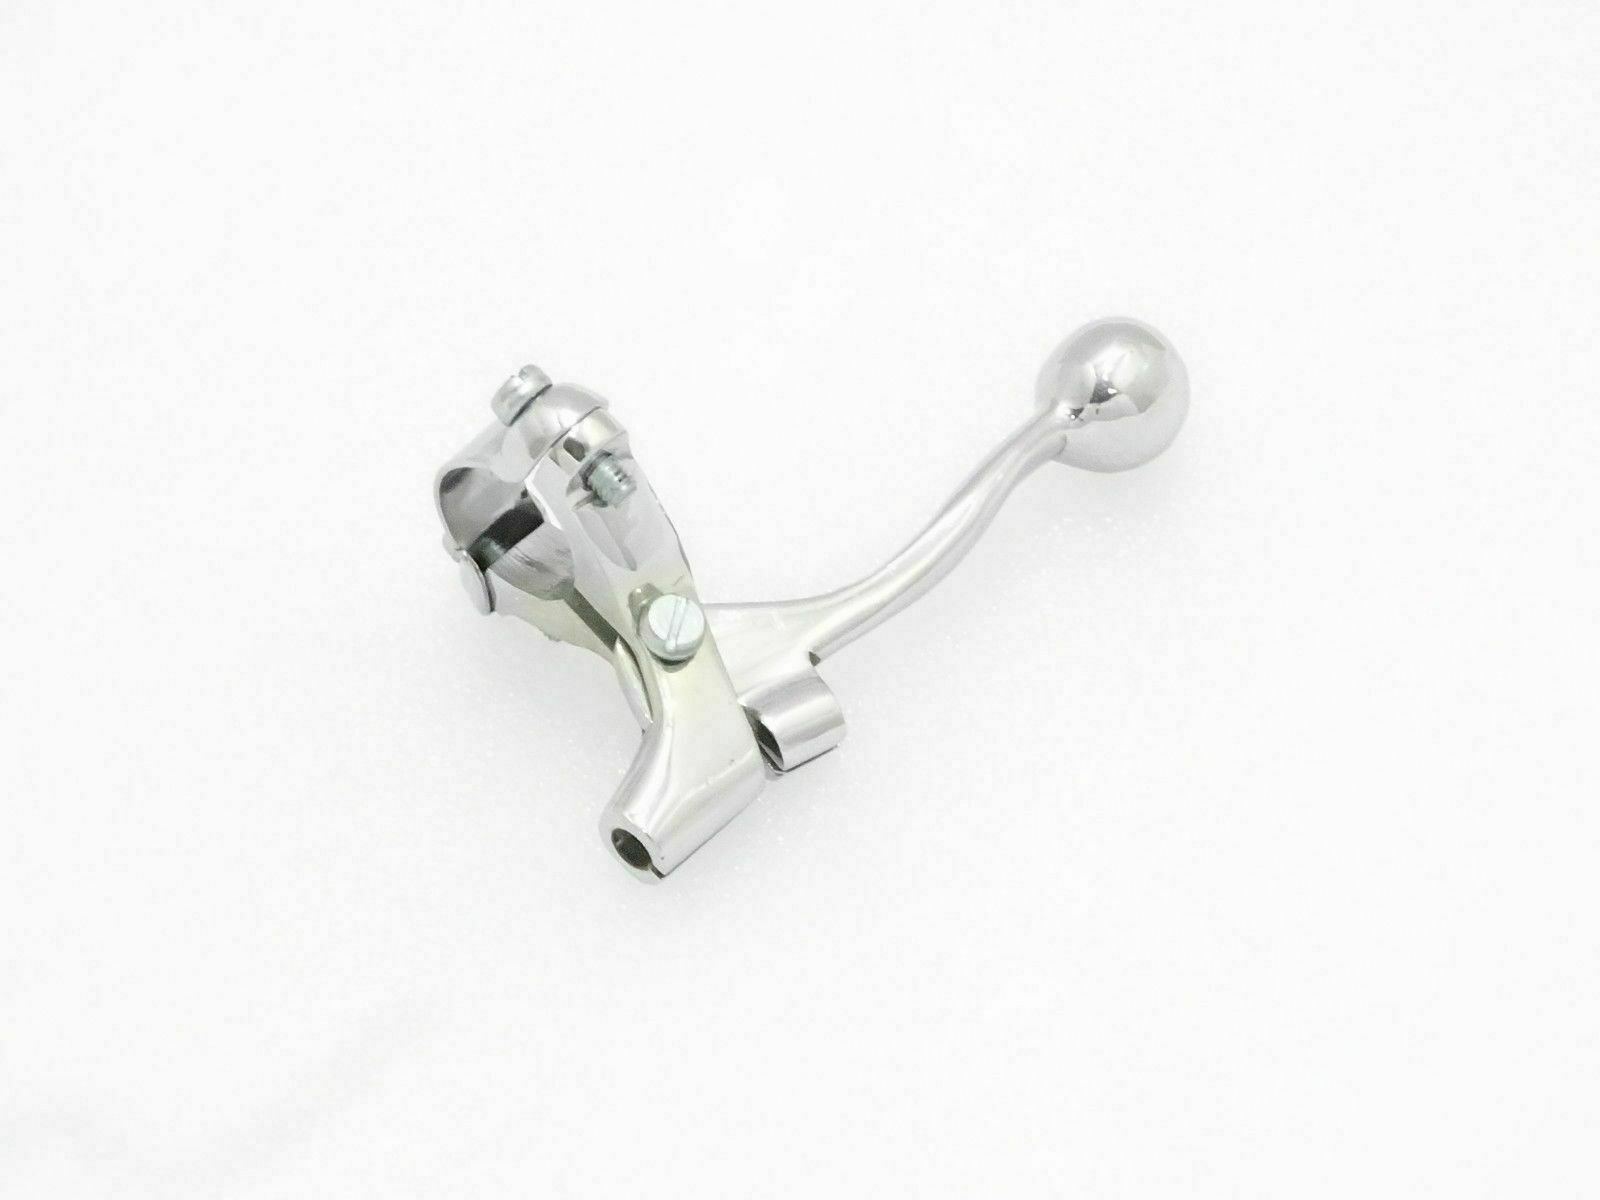 Details about   NEW UNIVERSAL CHROMED DECOMPRESSOR LEVER BALL END TYPE FOR 7/8" HANDLE BAR 